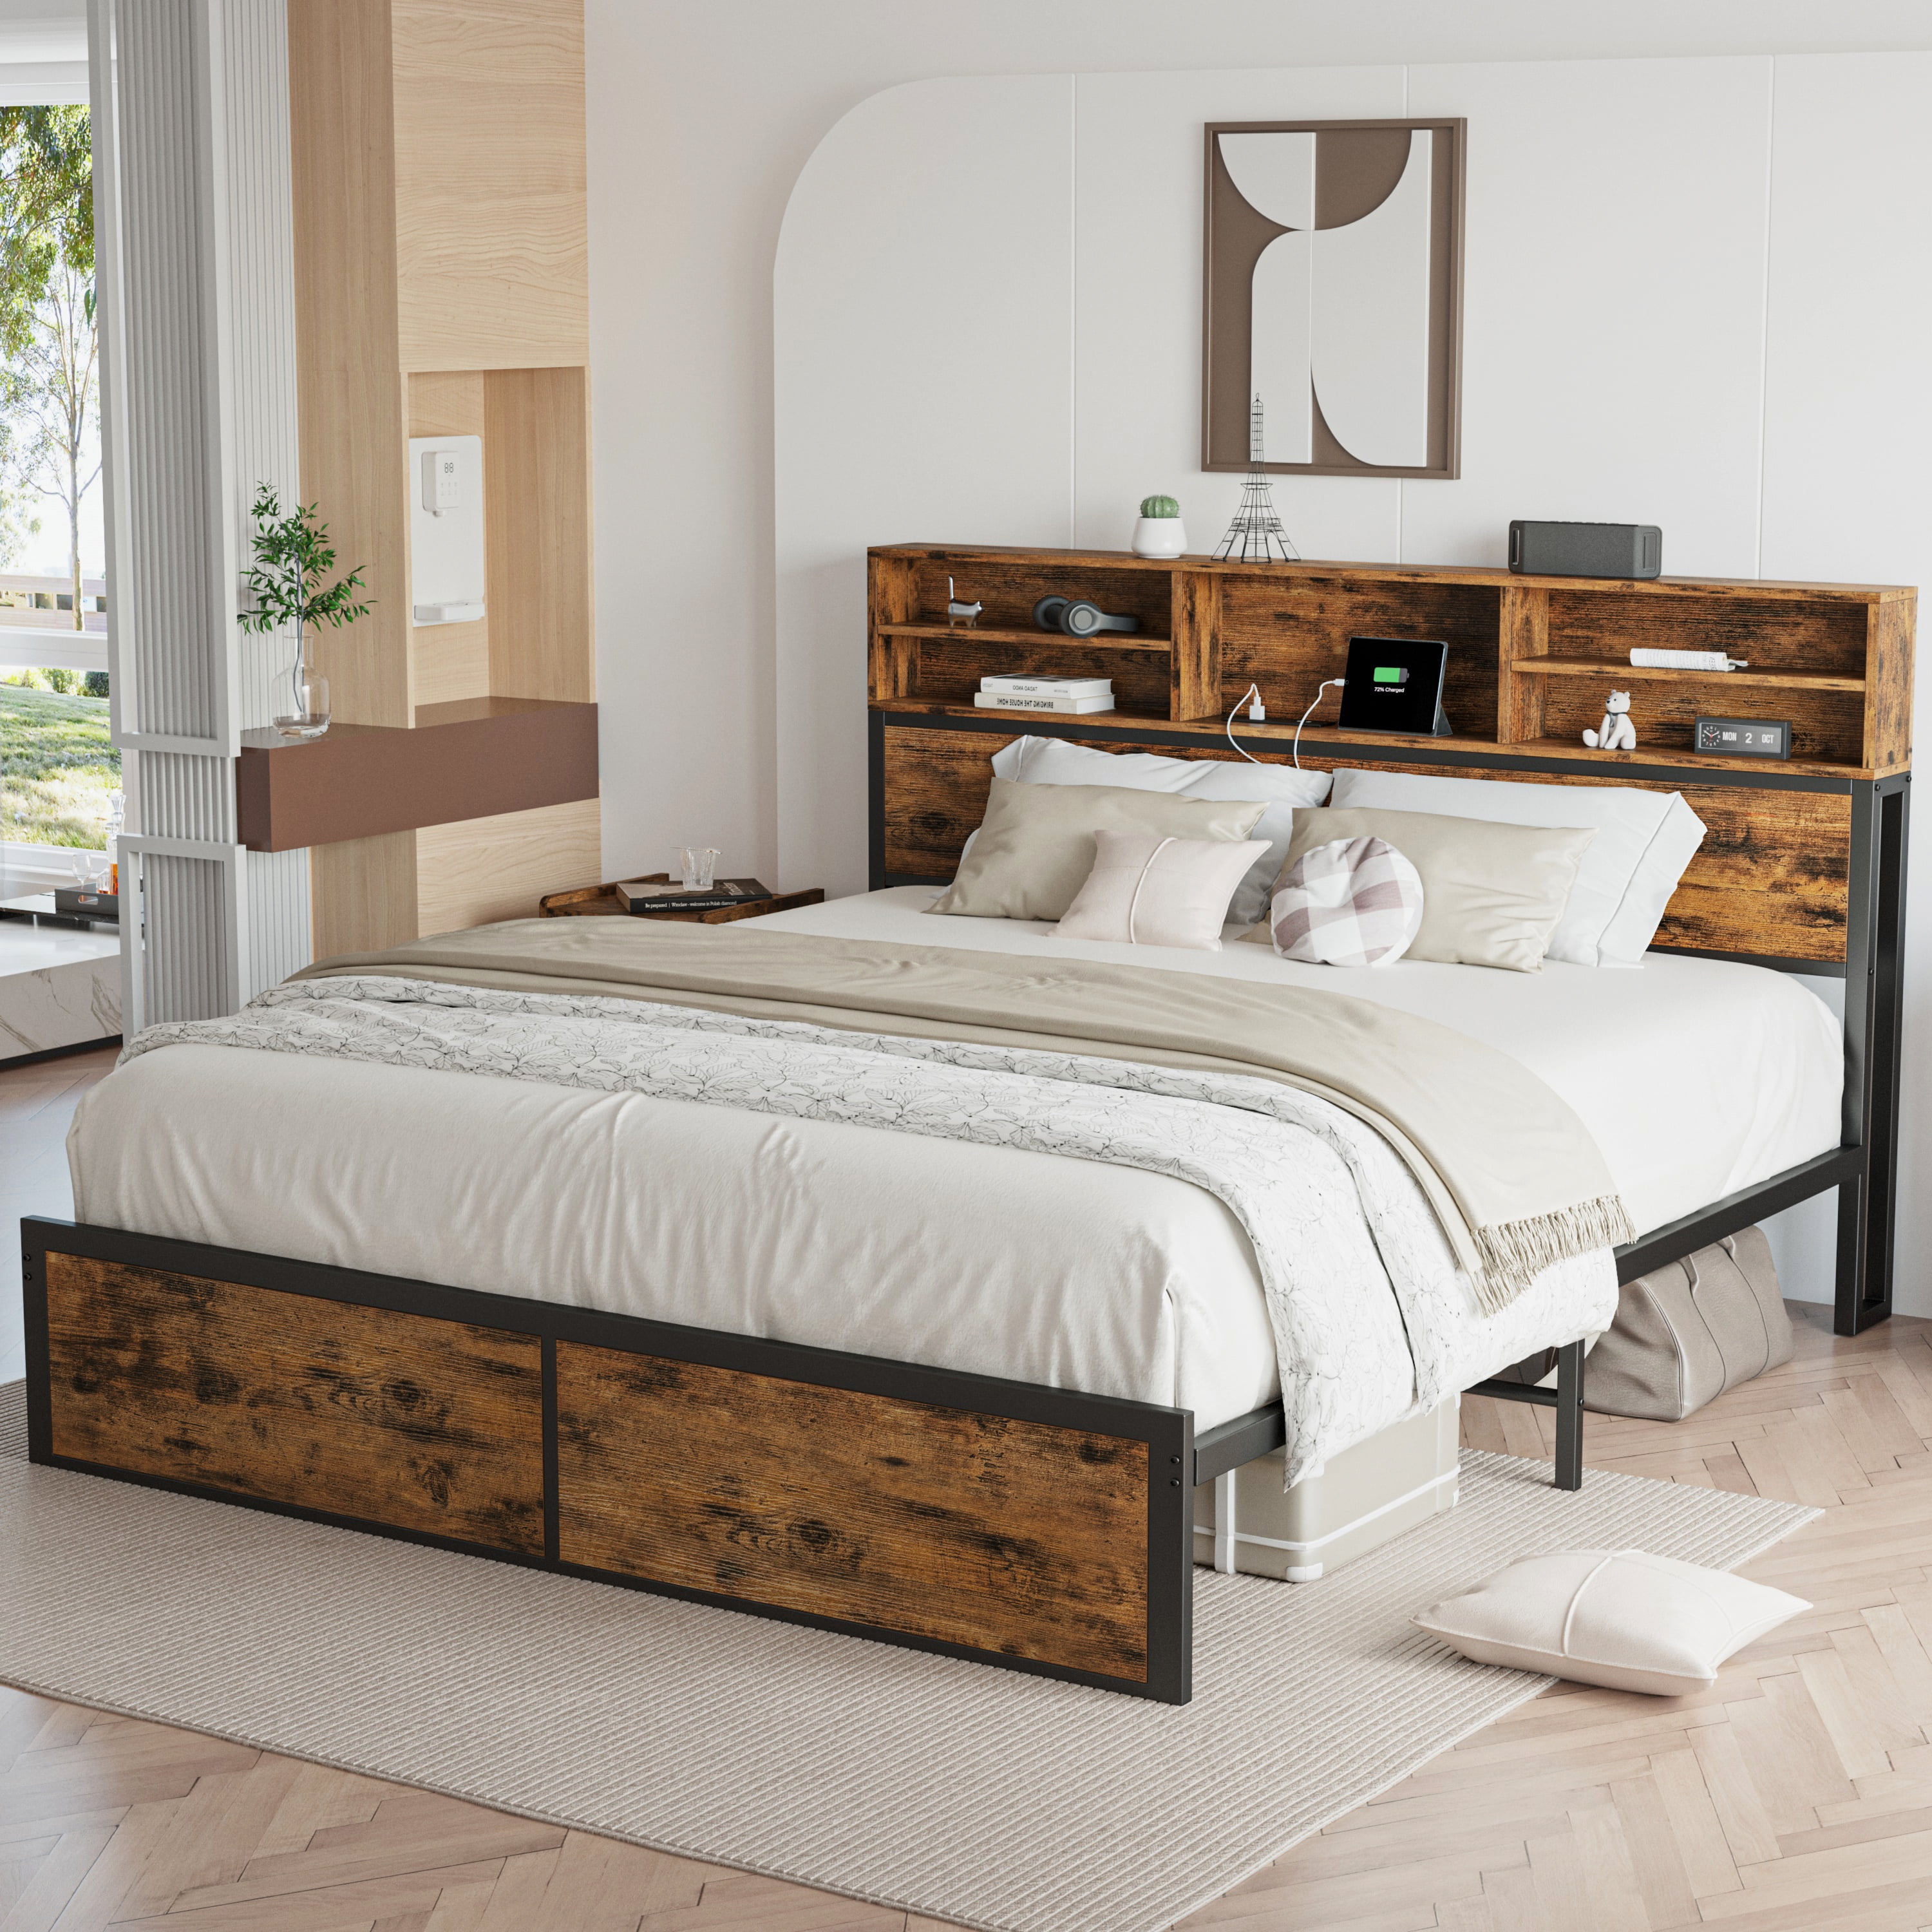 Likimio Queen Bed Frame With Tall Bookcase Headboard And Charging Station -  Walmart.Com